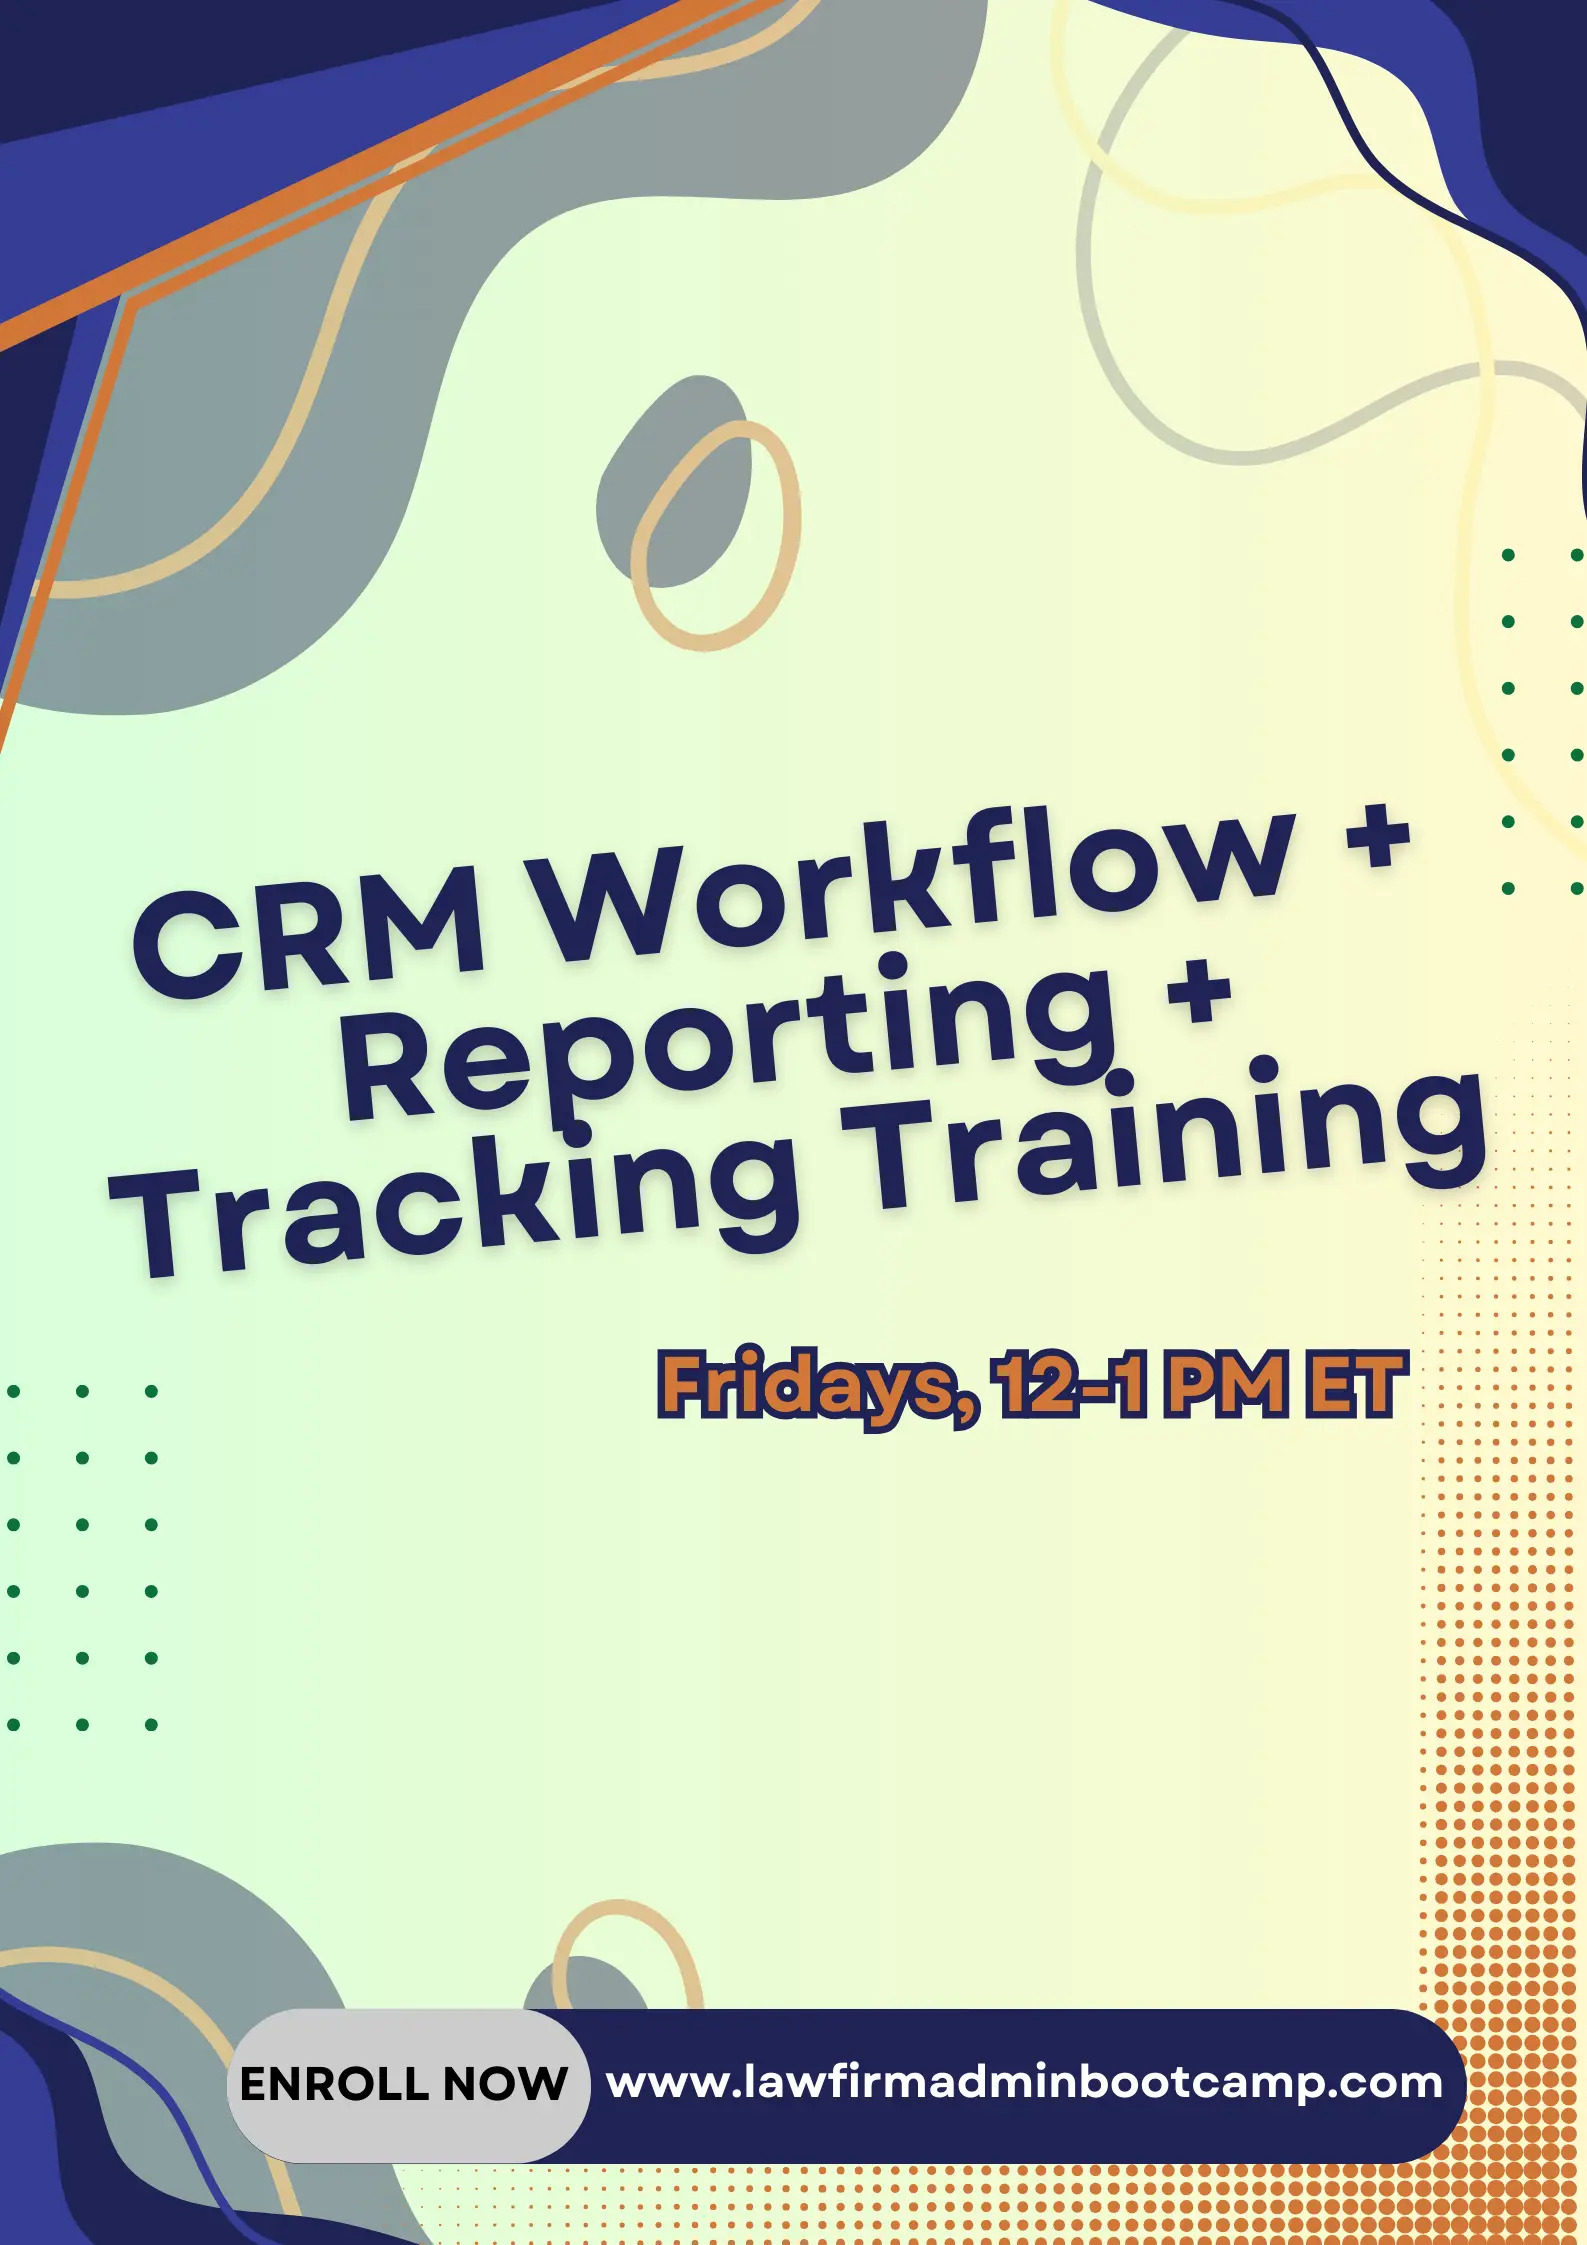 CRM Workflow + Reporting + Tracking Training